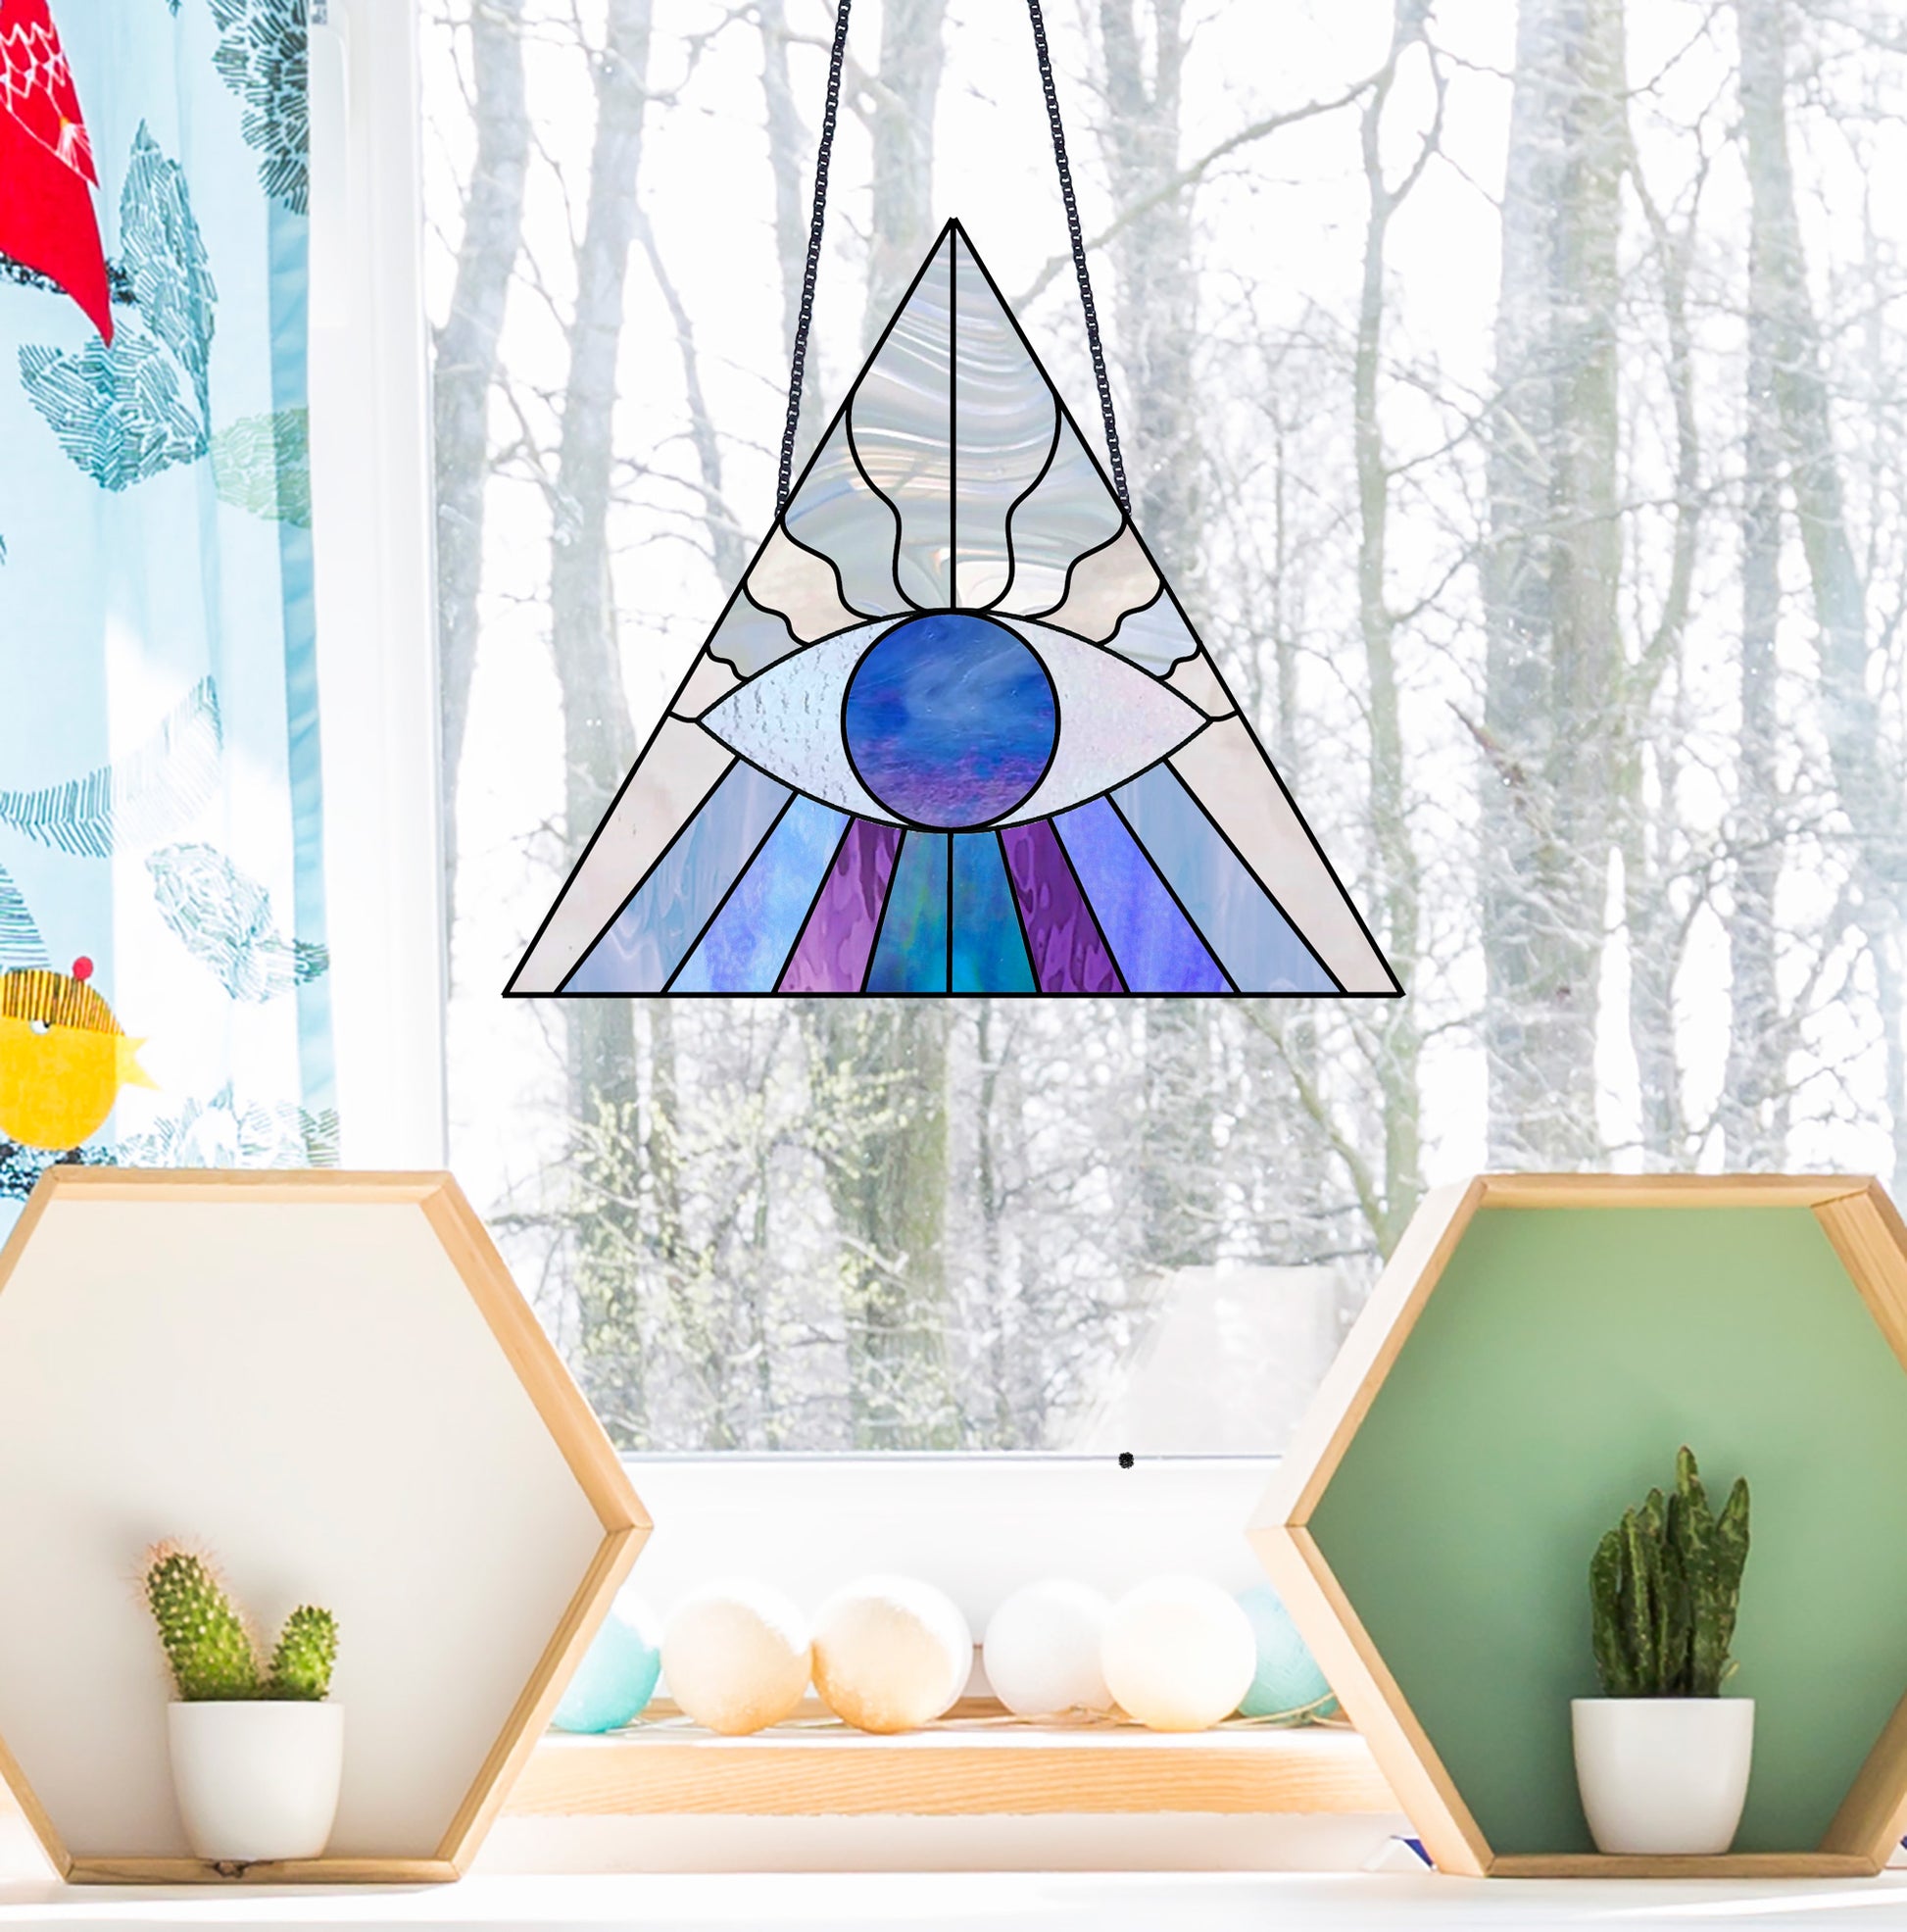 Original evil eye boho triangle stained glass pattern, instant PDF download, shown in a winter window